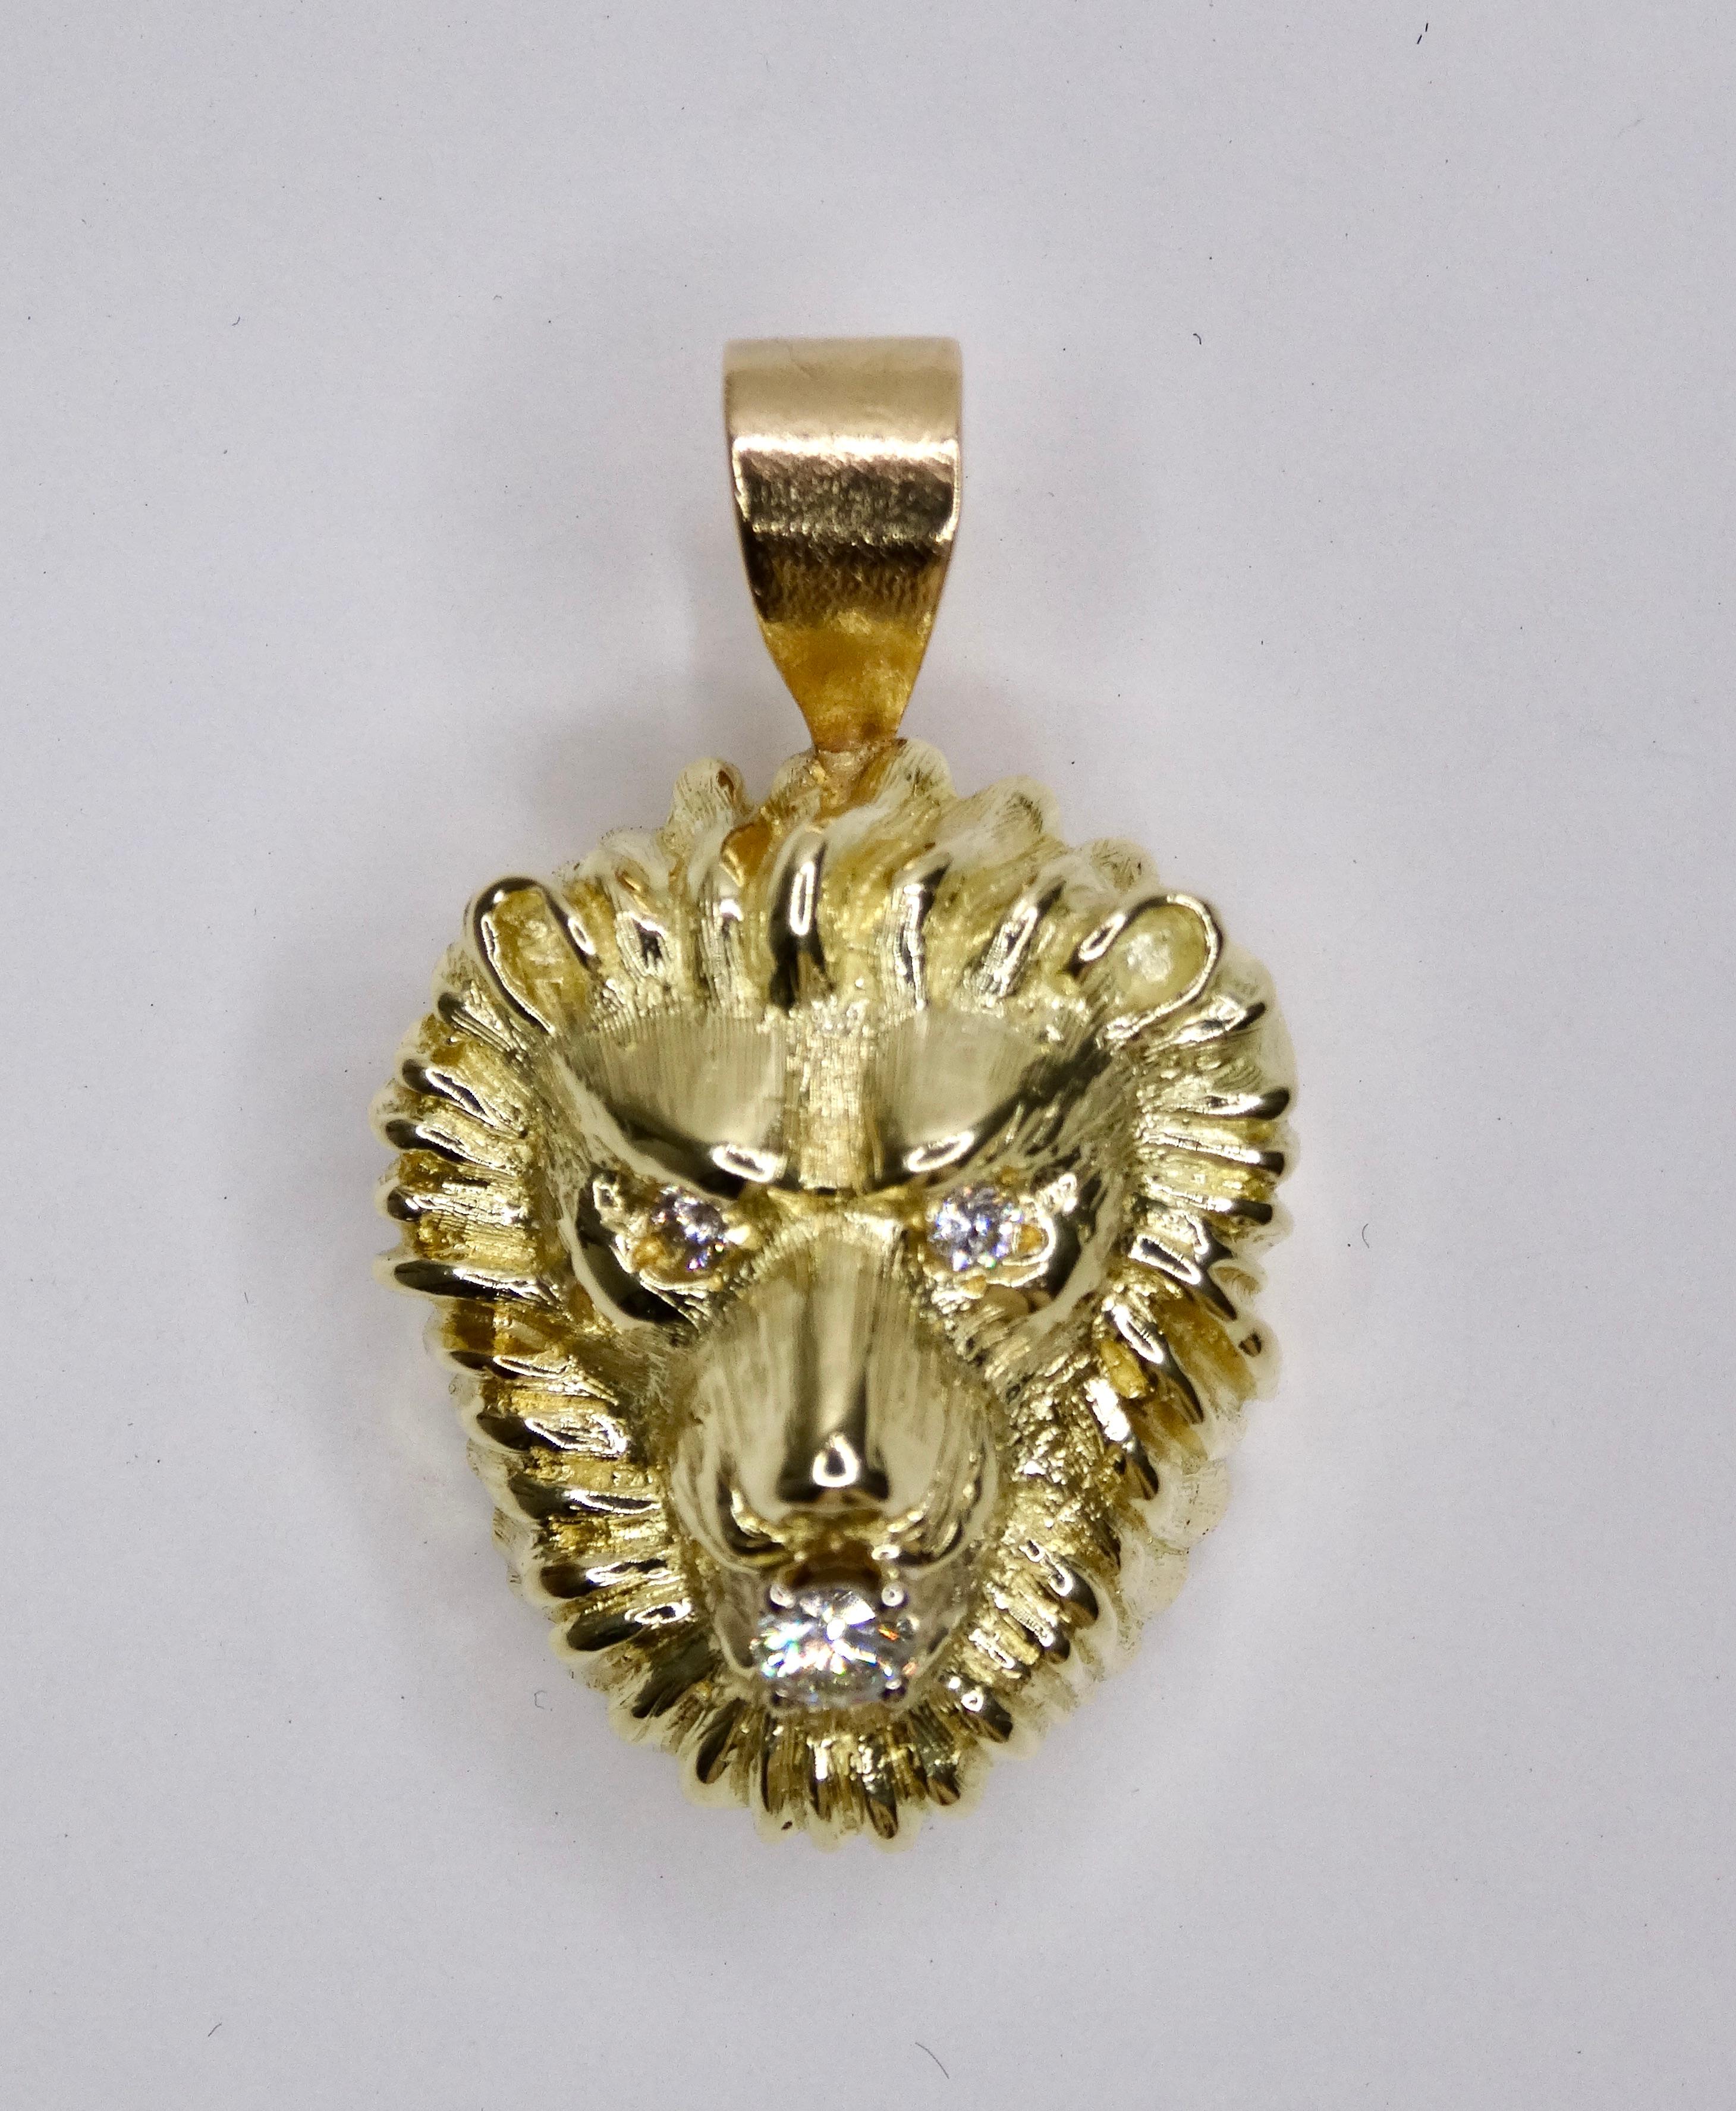 What do you think of when you think of a Lion? It may be majesty, courage, strength, protection, family, wisdom. Wear this necklace enhacer with the hopes to emulate some characteristics of a lion and take your day by storm. This pendant is